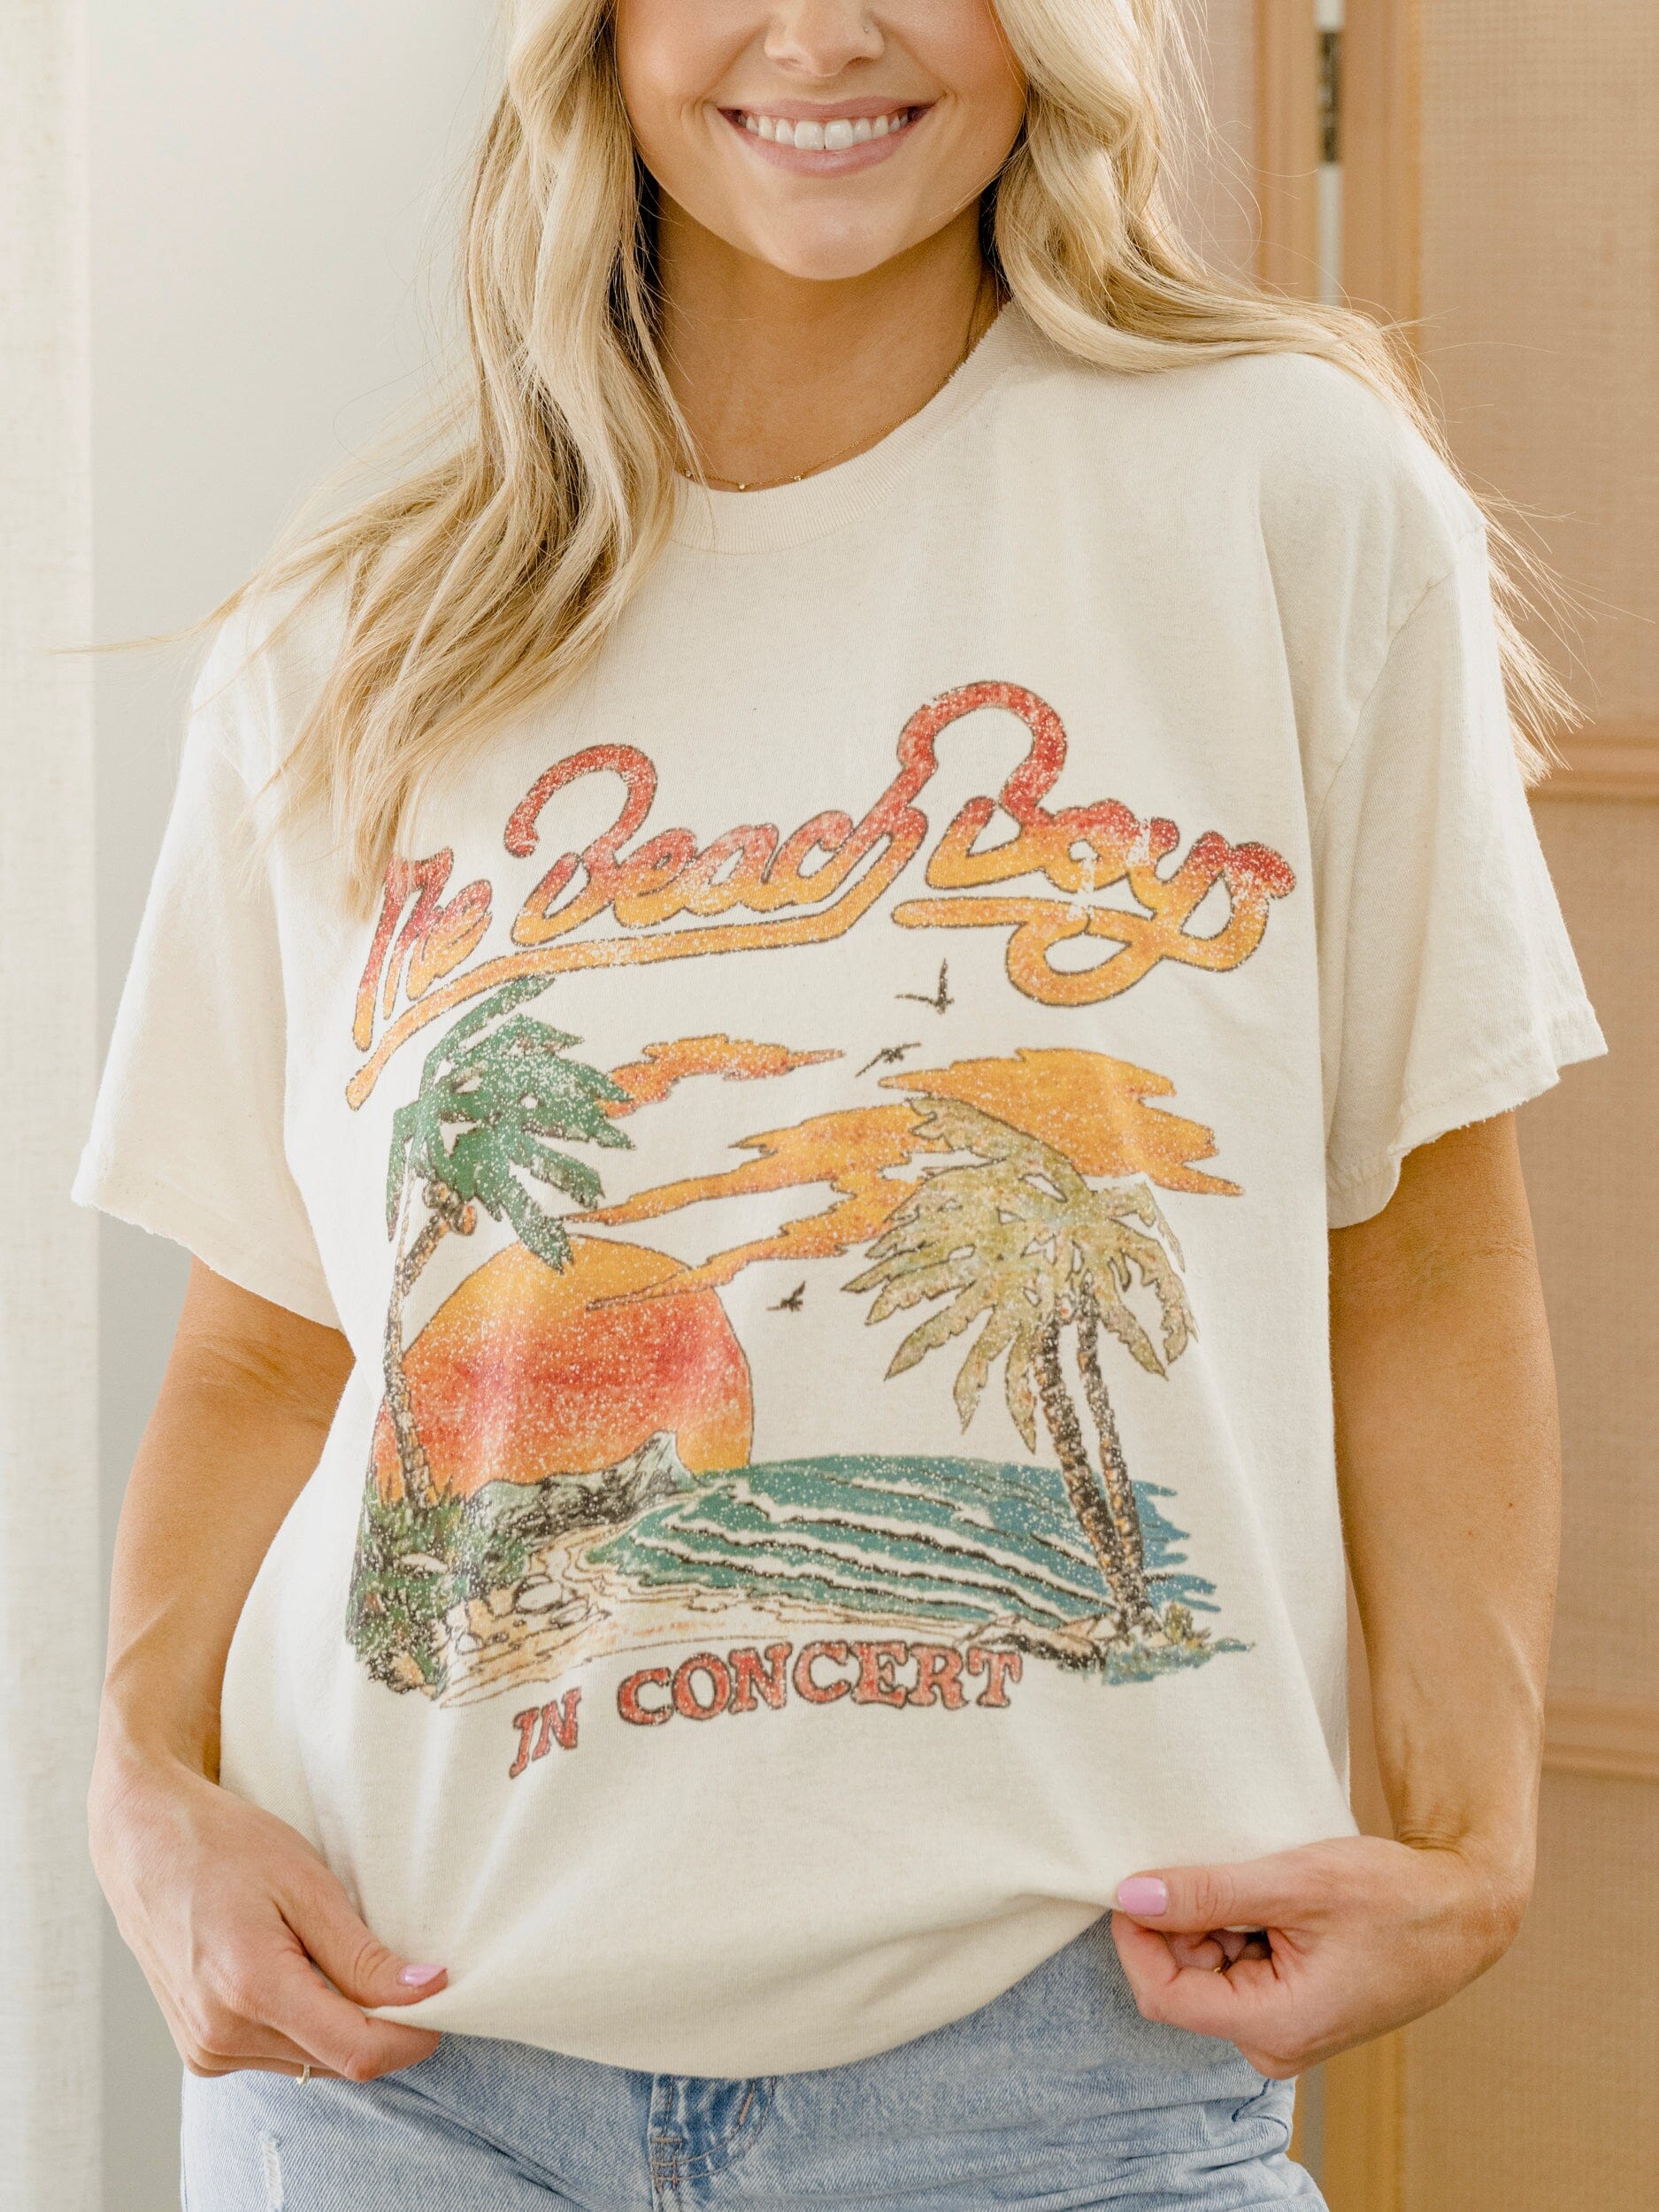 The Beach Boys In Concert Off White Thrifted Tee